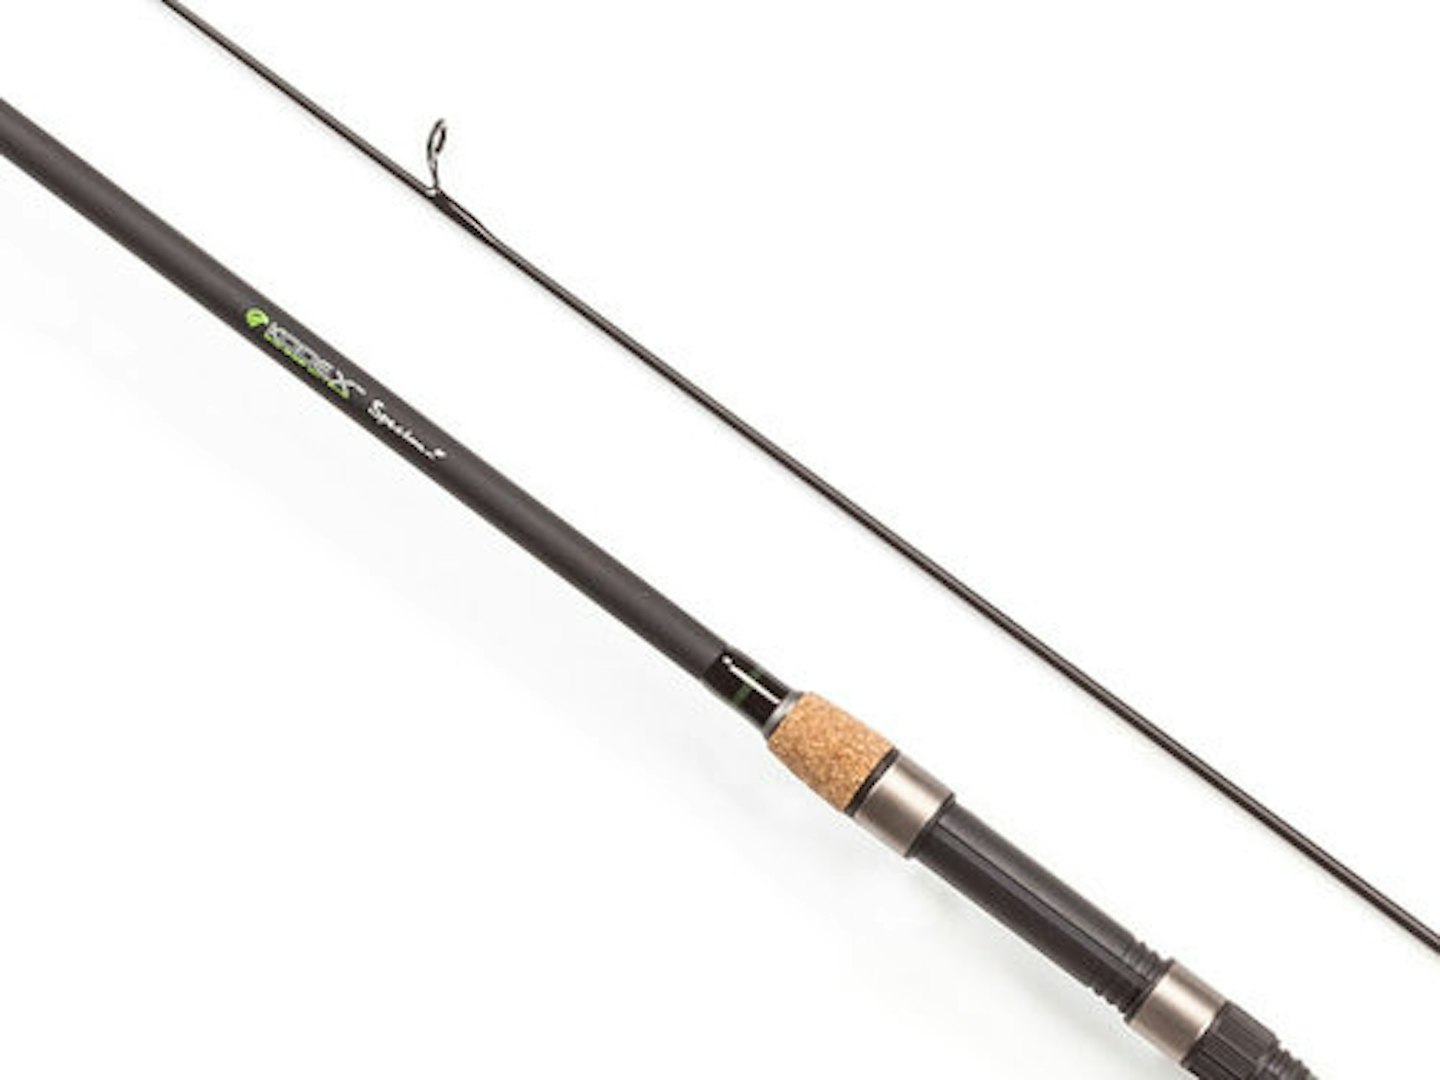 BUYER'S GUIDE TO THE BEST FLOATER FISHING RODS FOR CARP